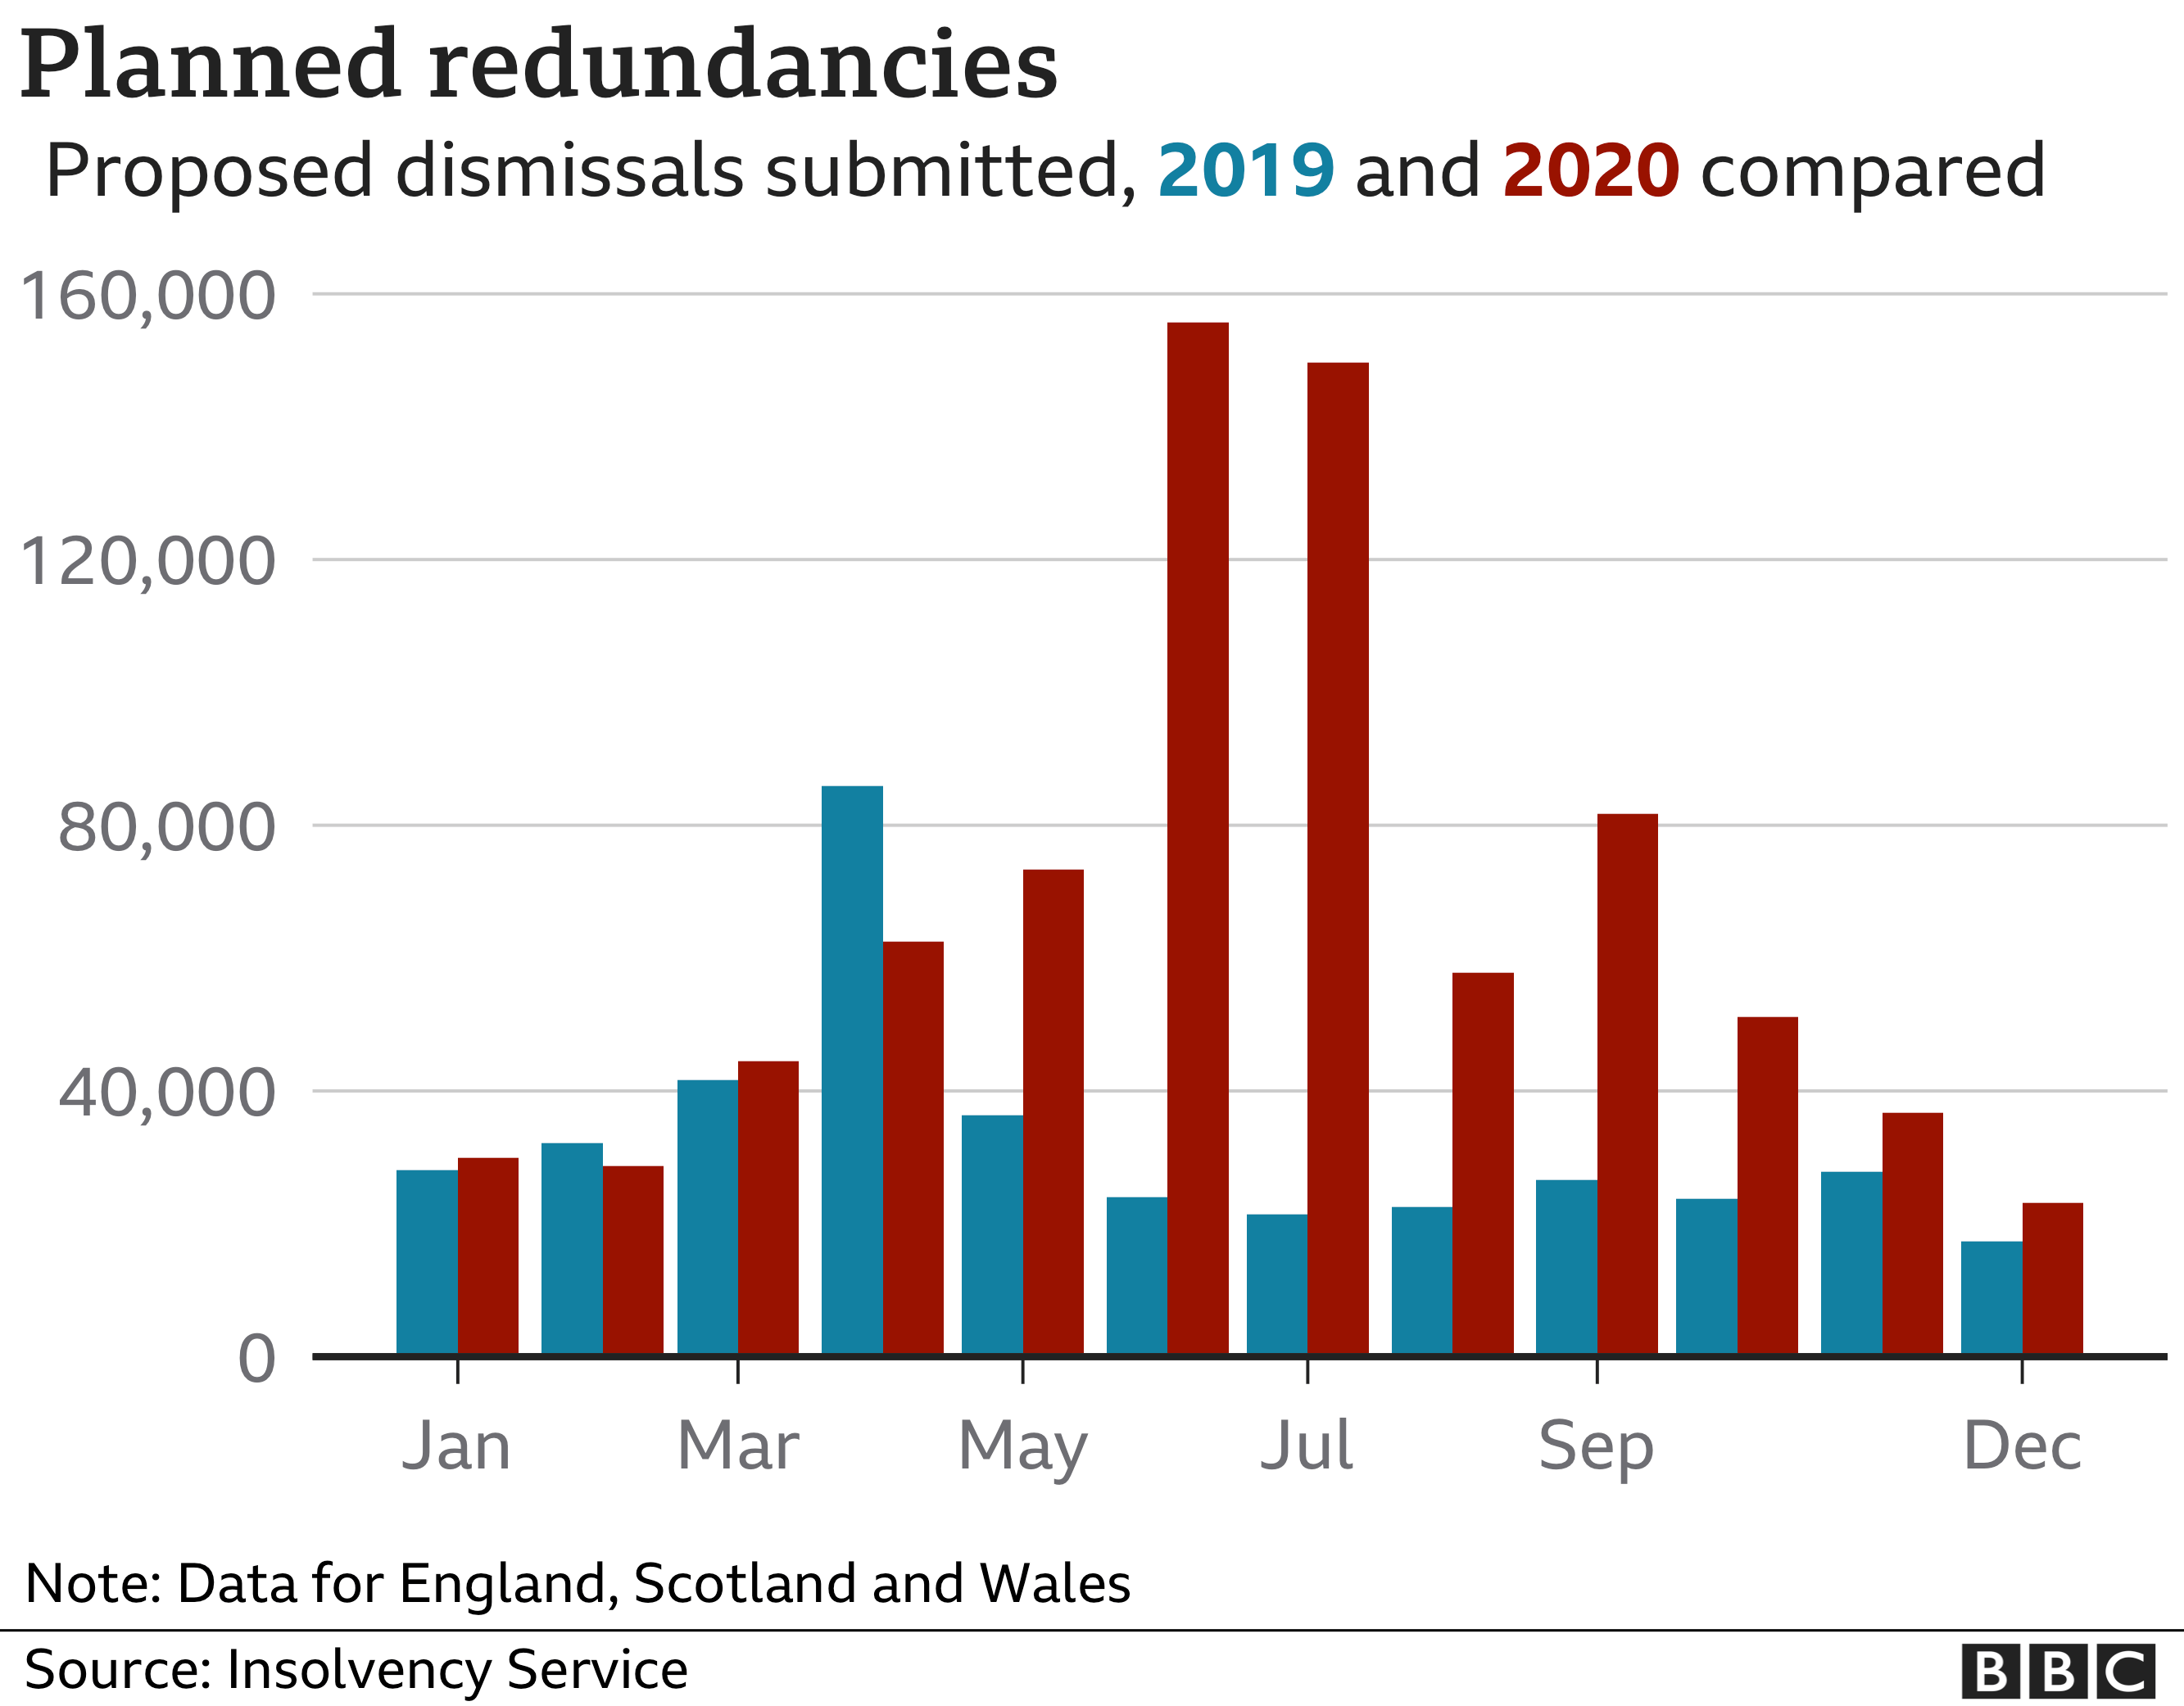 Graph showing the number of redundancies proposed by employers in each month of 2020 with 2019 figures for comparison.